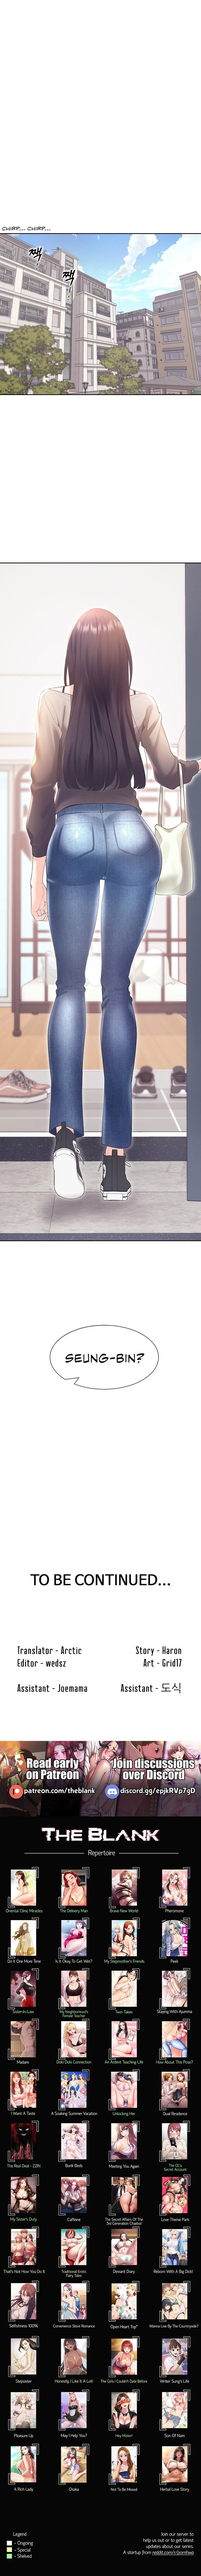 bunking-bed-chap-36-14